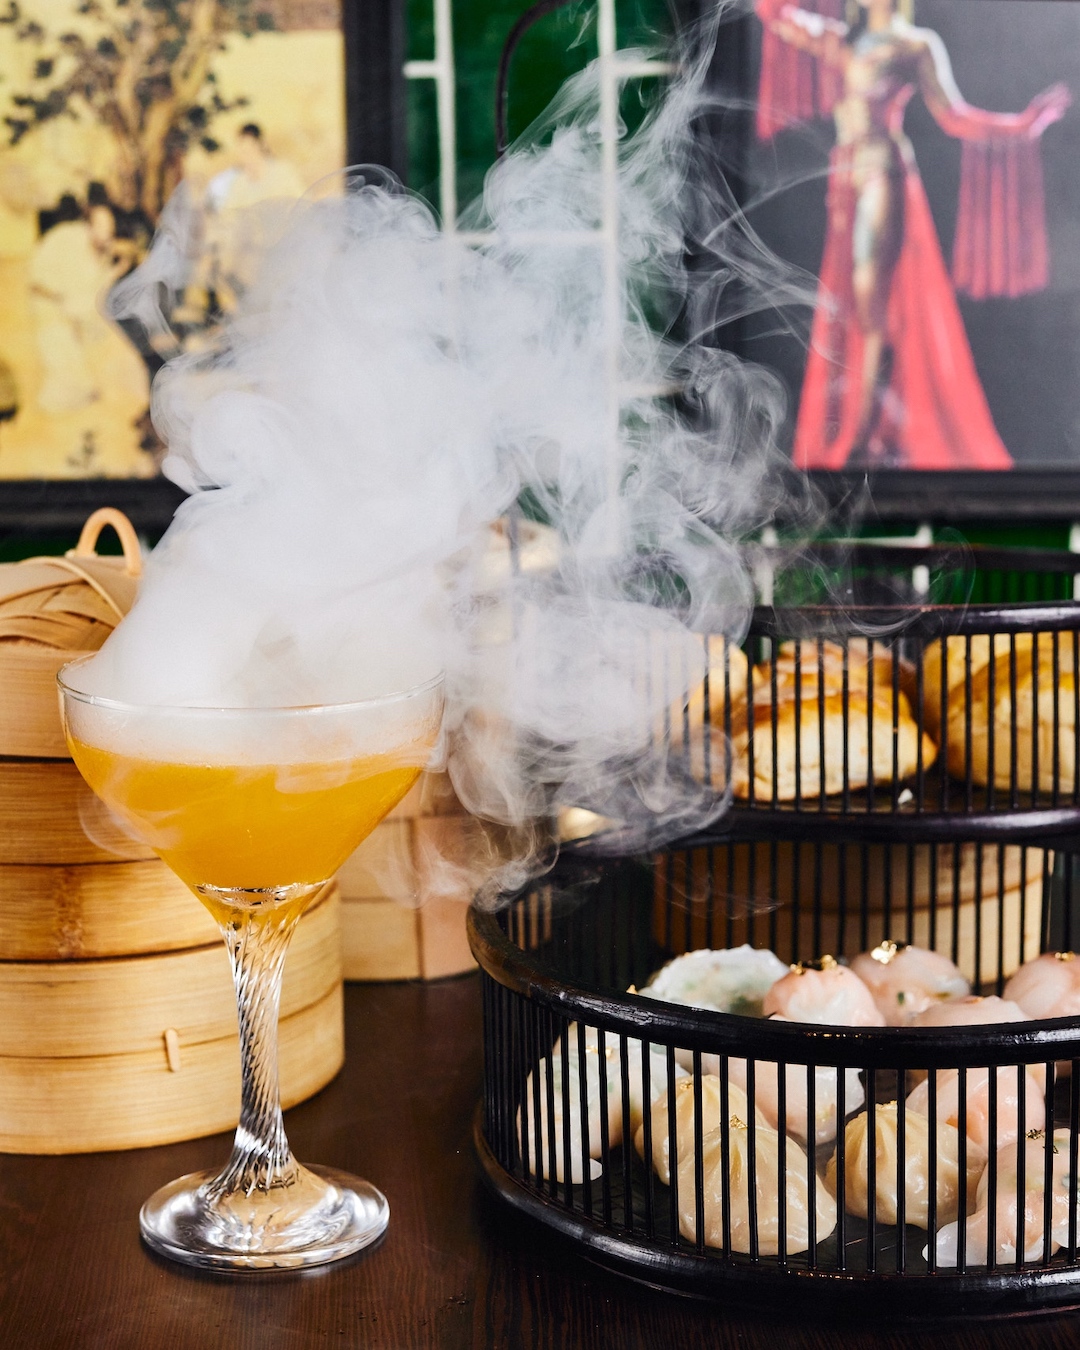 A platter of dumplings with a cocktail.